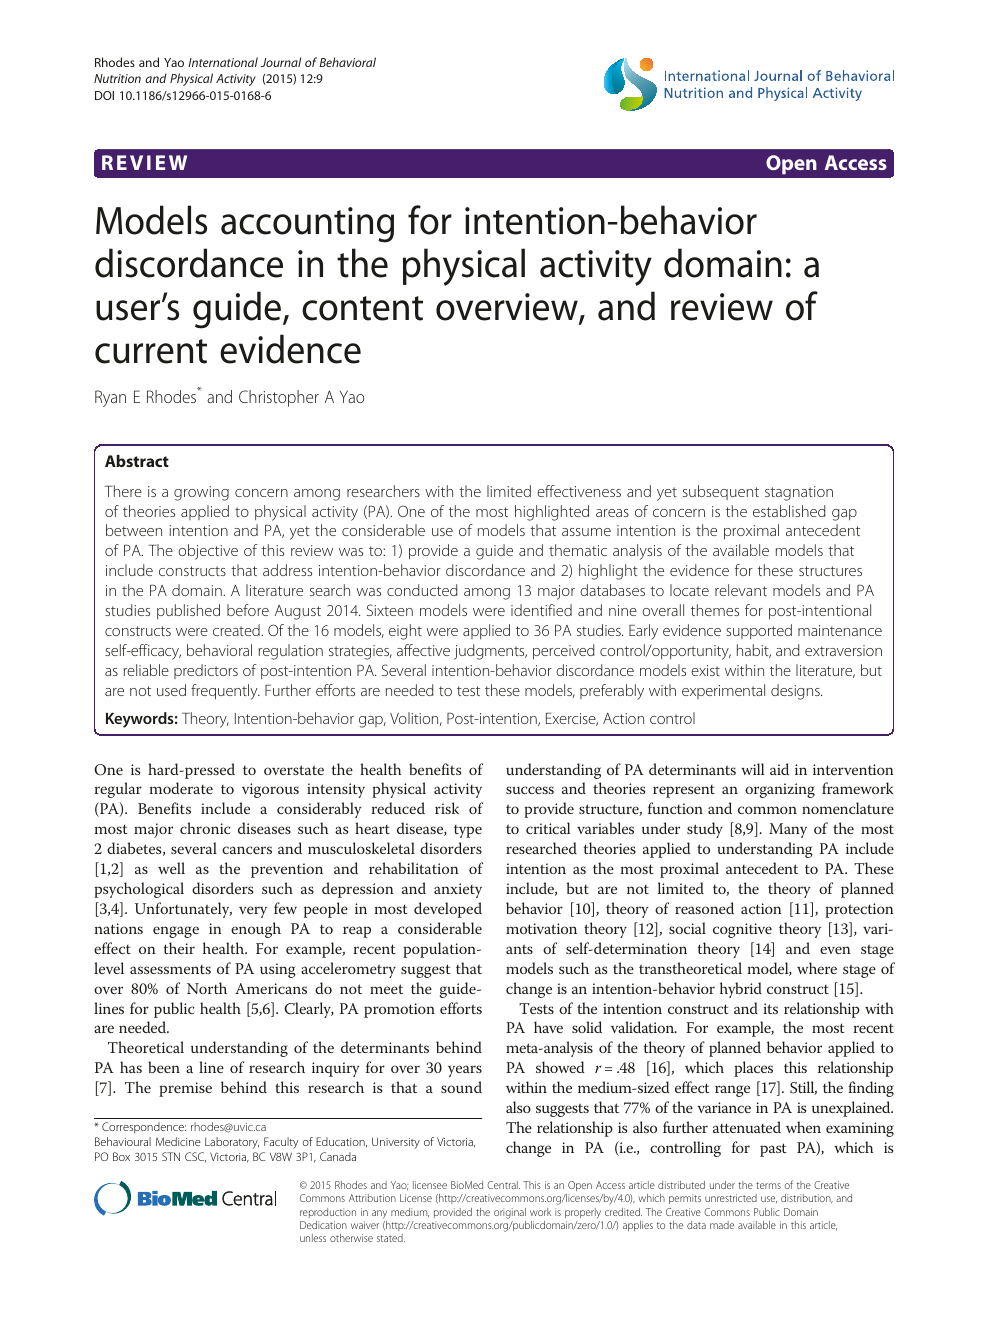 Models accounting for intention-behavior discordance in the physical activity user's guide, content overview, and review of current evidence topic of research paper in Psychology. scholarly article PDF and